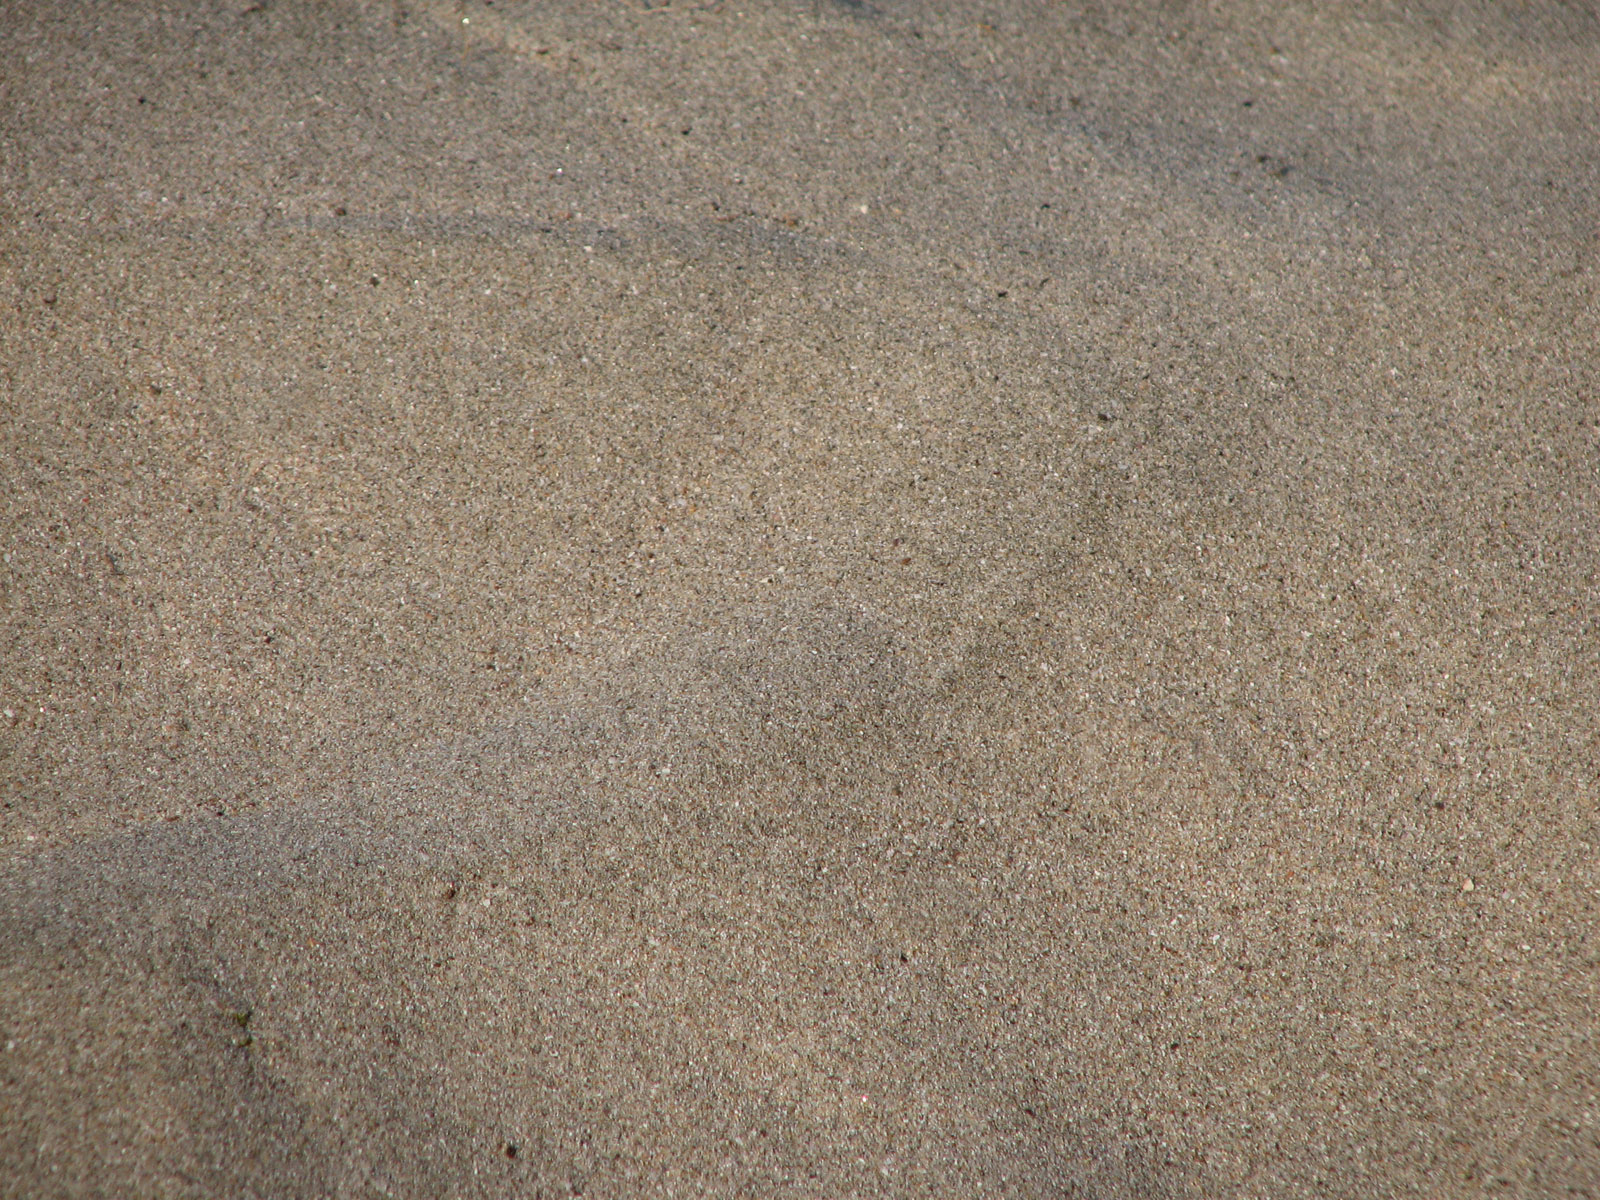 Sand-08 for 1600 x 1200 resolution